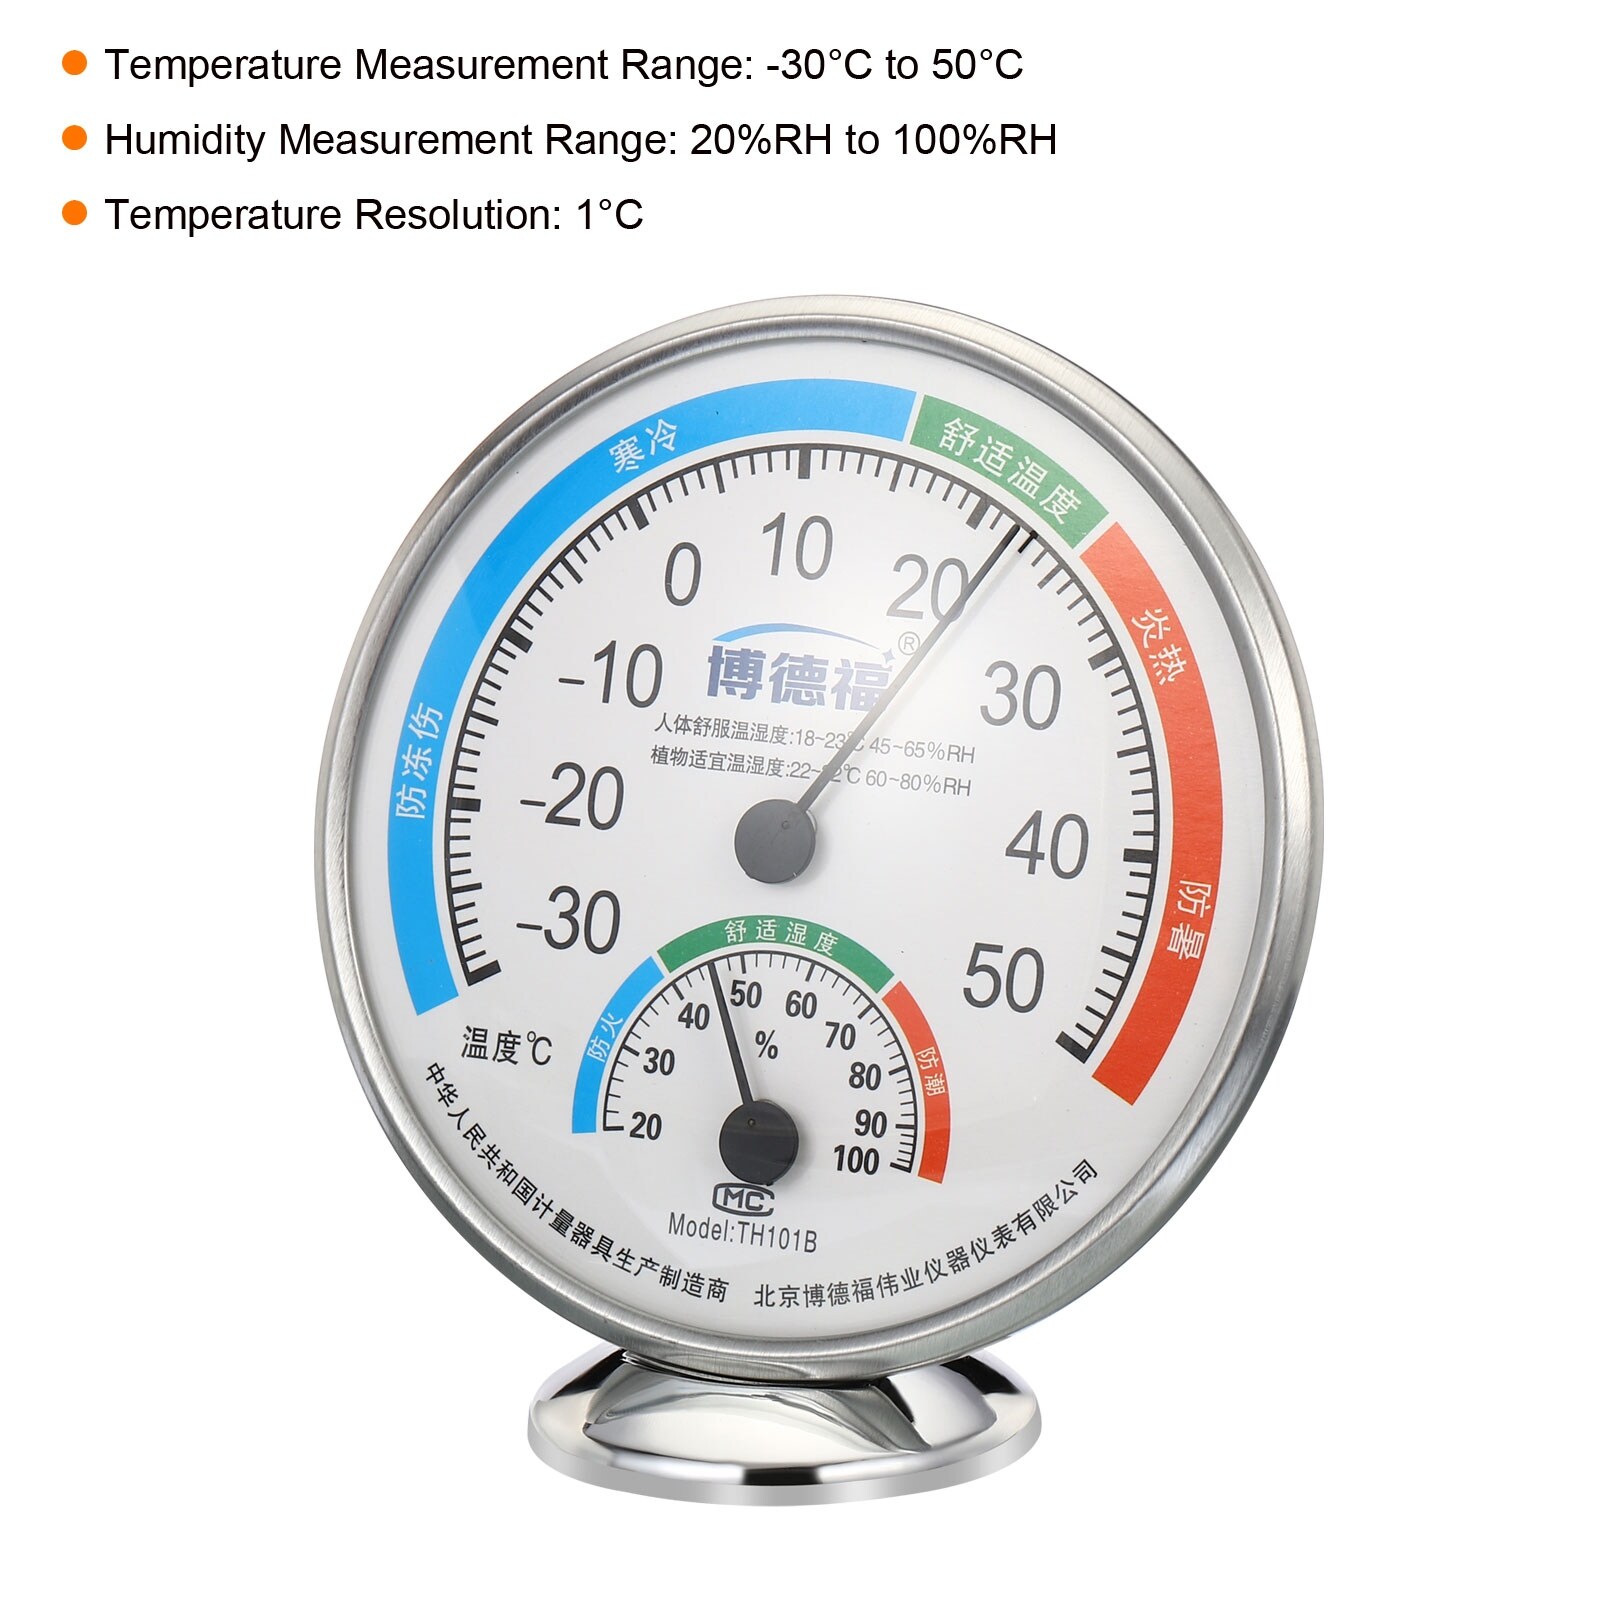 https://ak1.ostkcdn.com/images/products/is/images/direct/da6a91adfea14582f079b90b056fb52a27c61a10/1-Set-5%22-Indoor-Outdoor-Thermometer-Hygrometer-Temperature-Humidity-Monitor.jpg